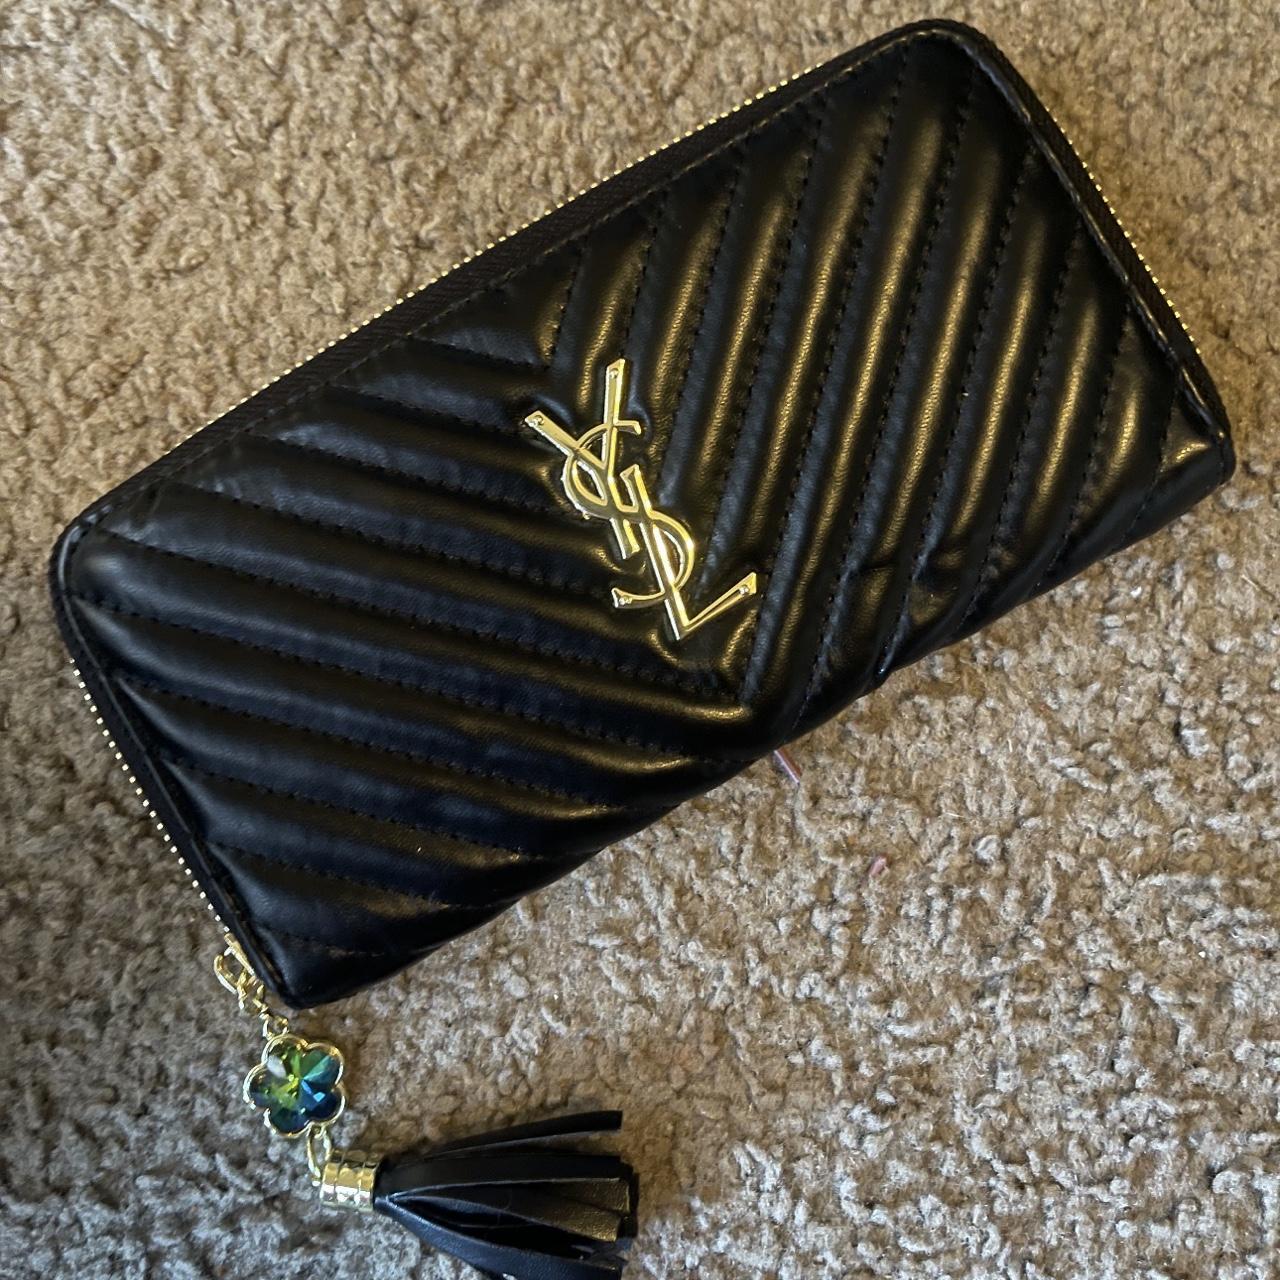 Black wallet bought from a boutique - Depop